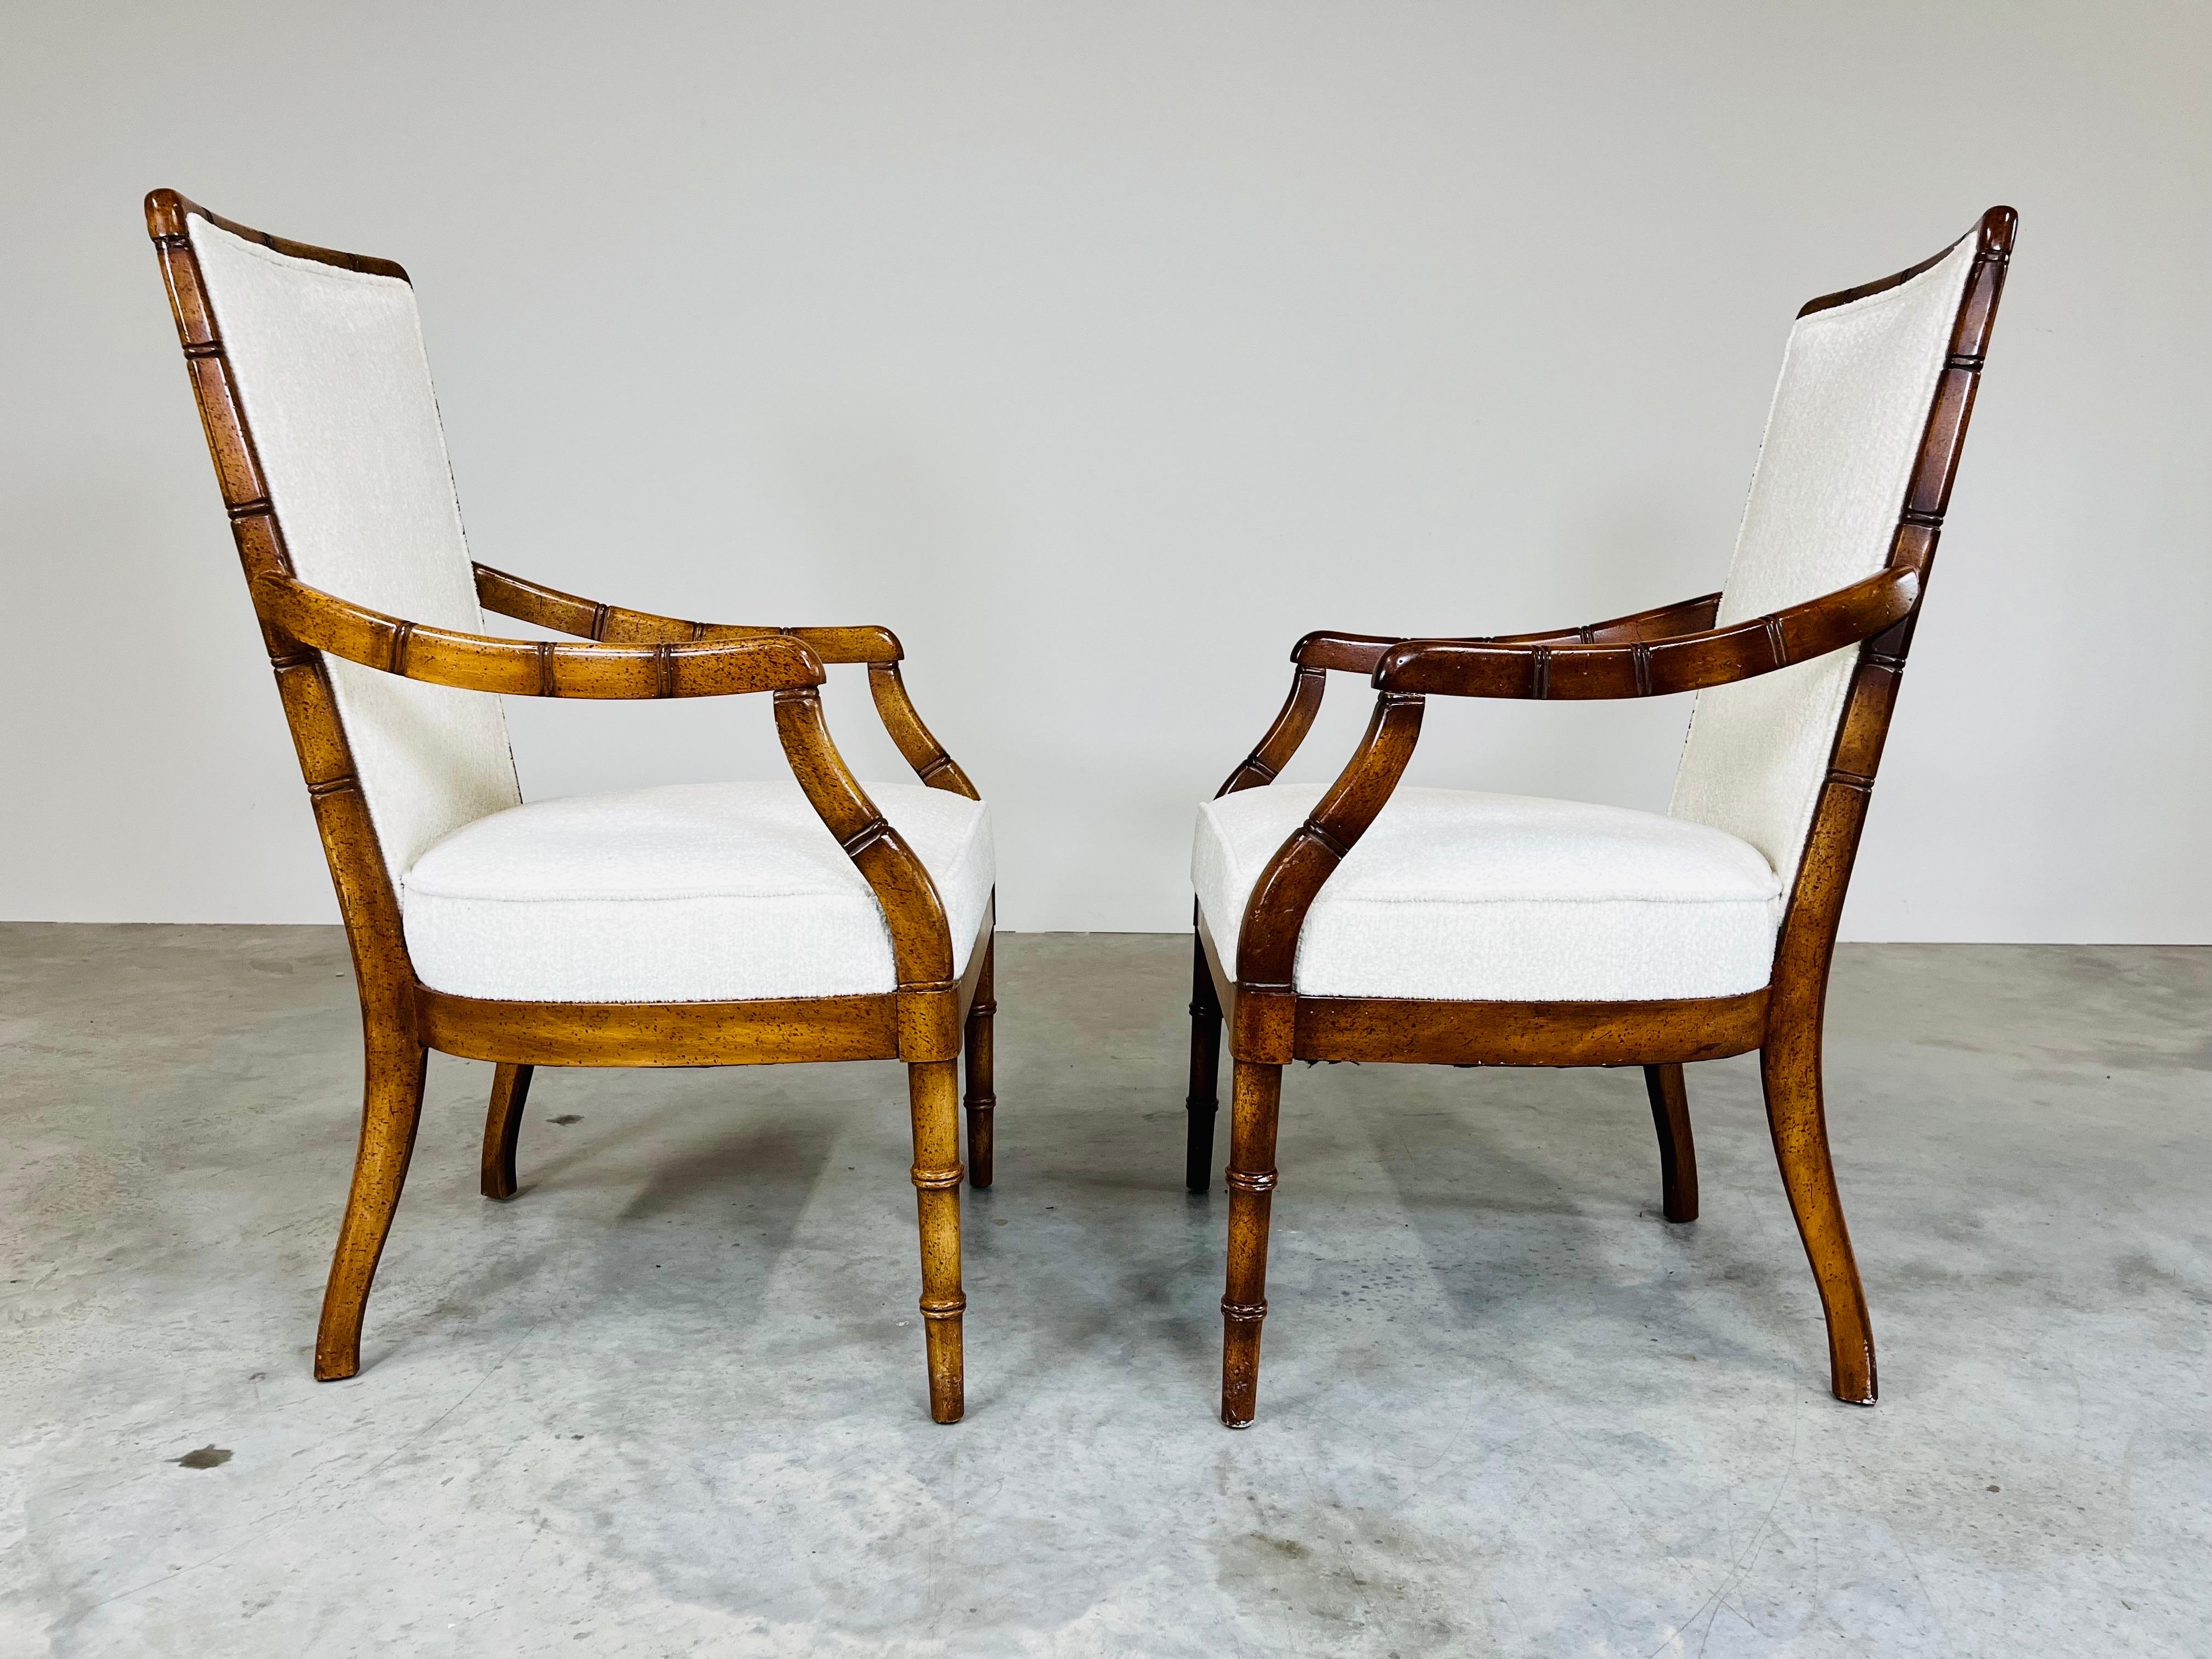 Spun Pair of Vintage Chinese Chippendale Faux Bamboo Armchairs with New Supple Fabric